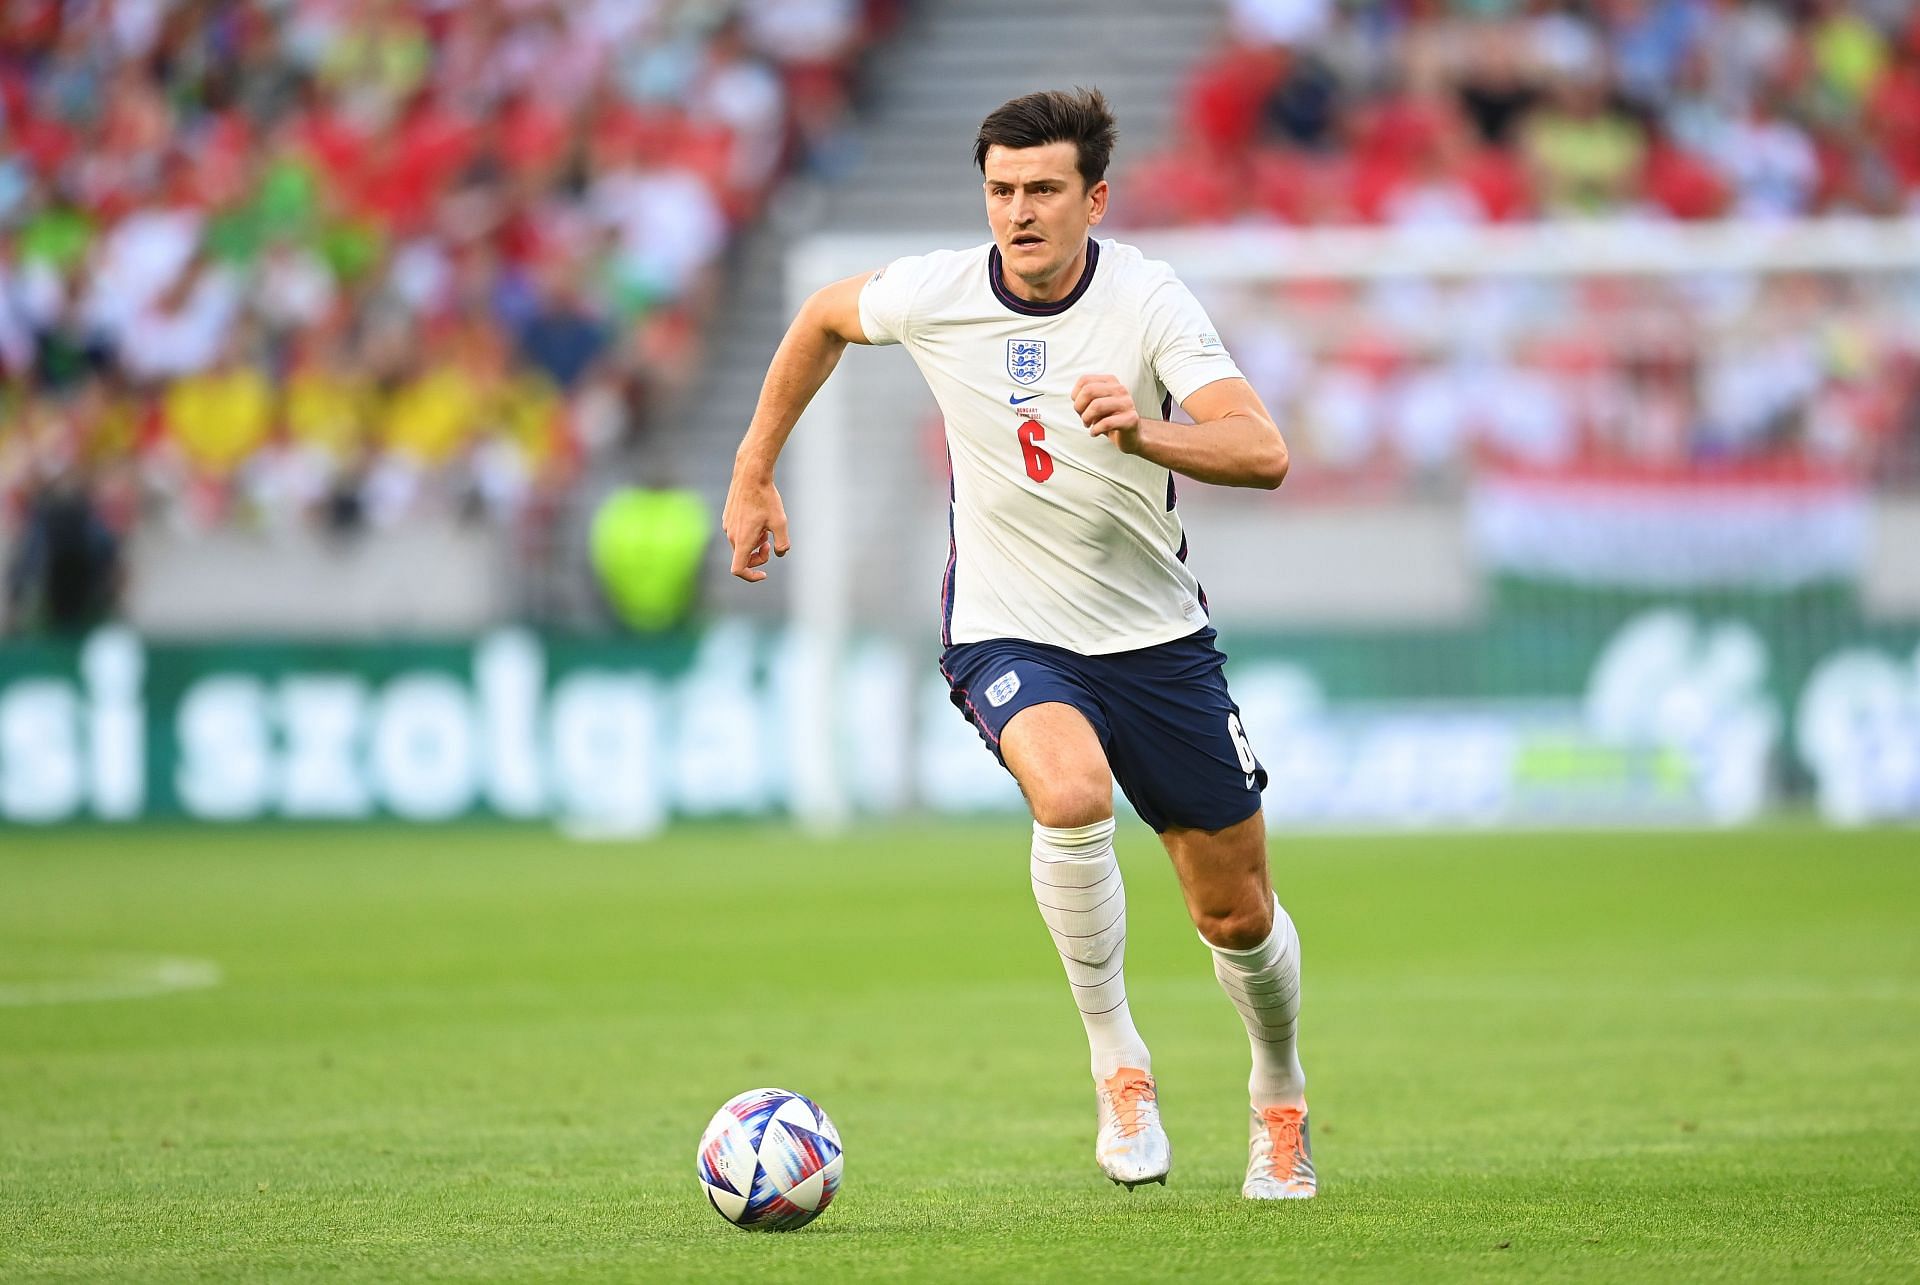 Harry Maguire has faced criticism for his recent performances at Old Trafford